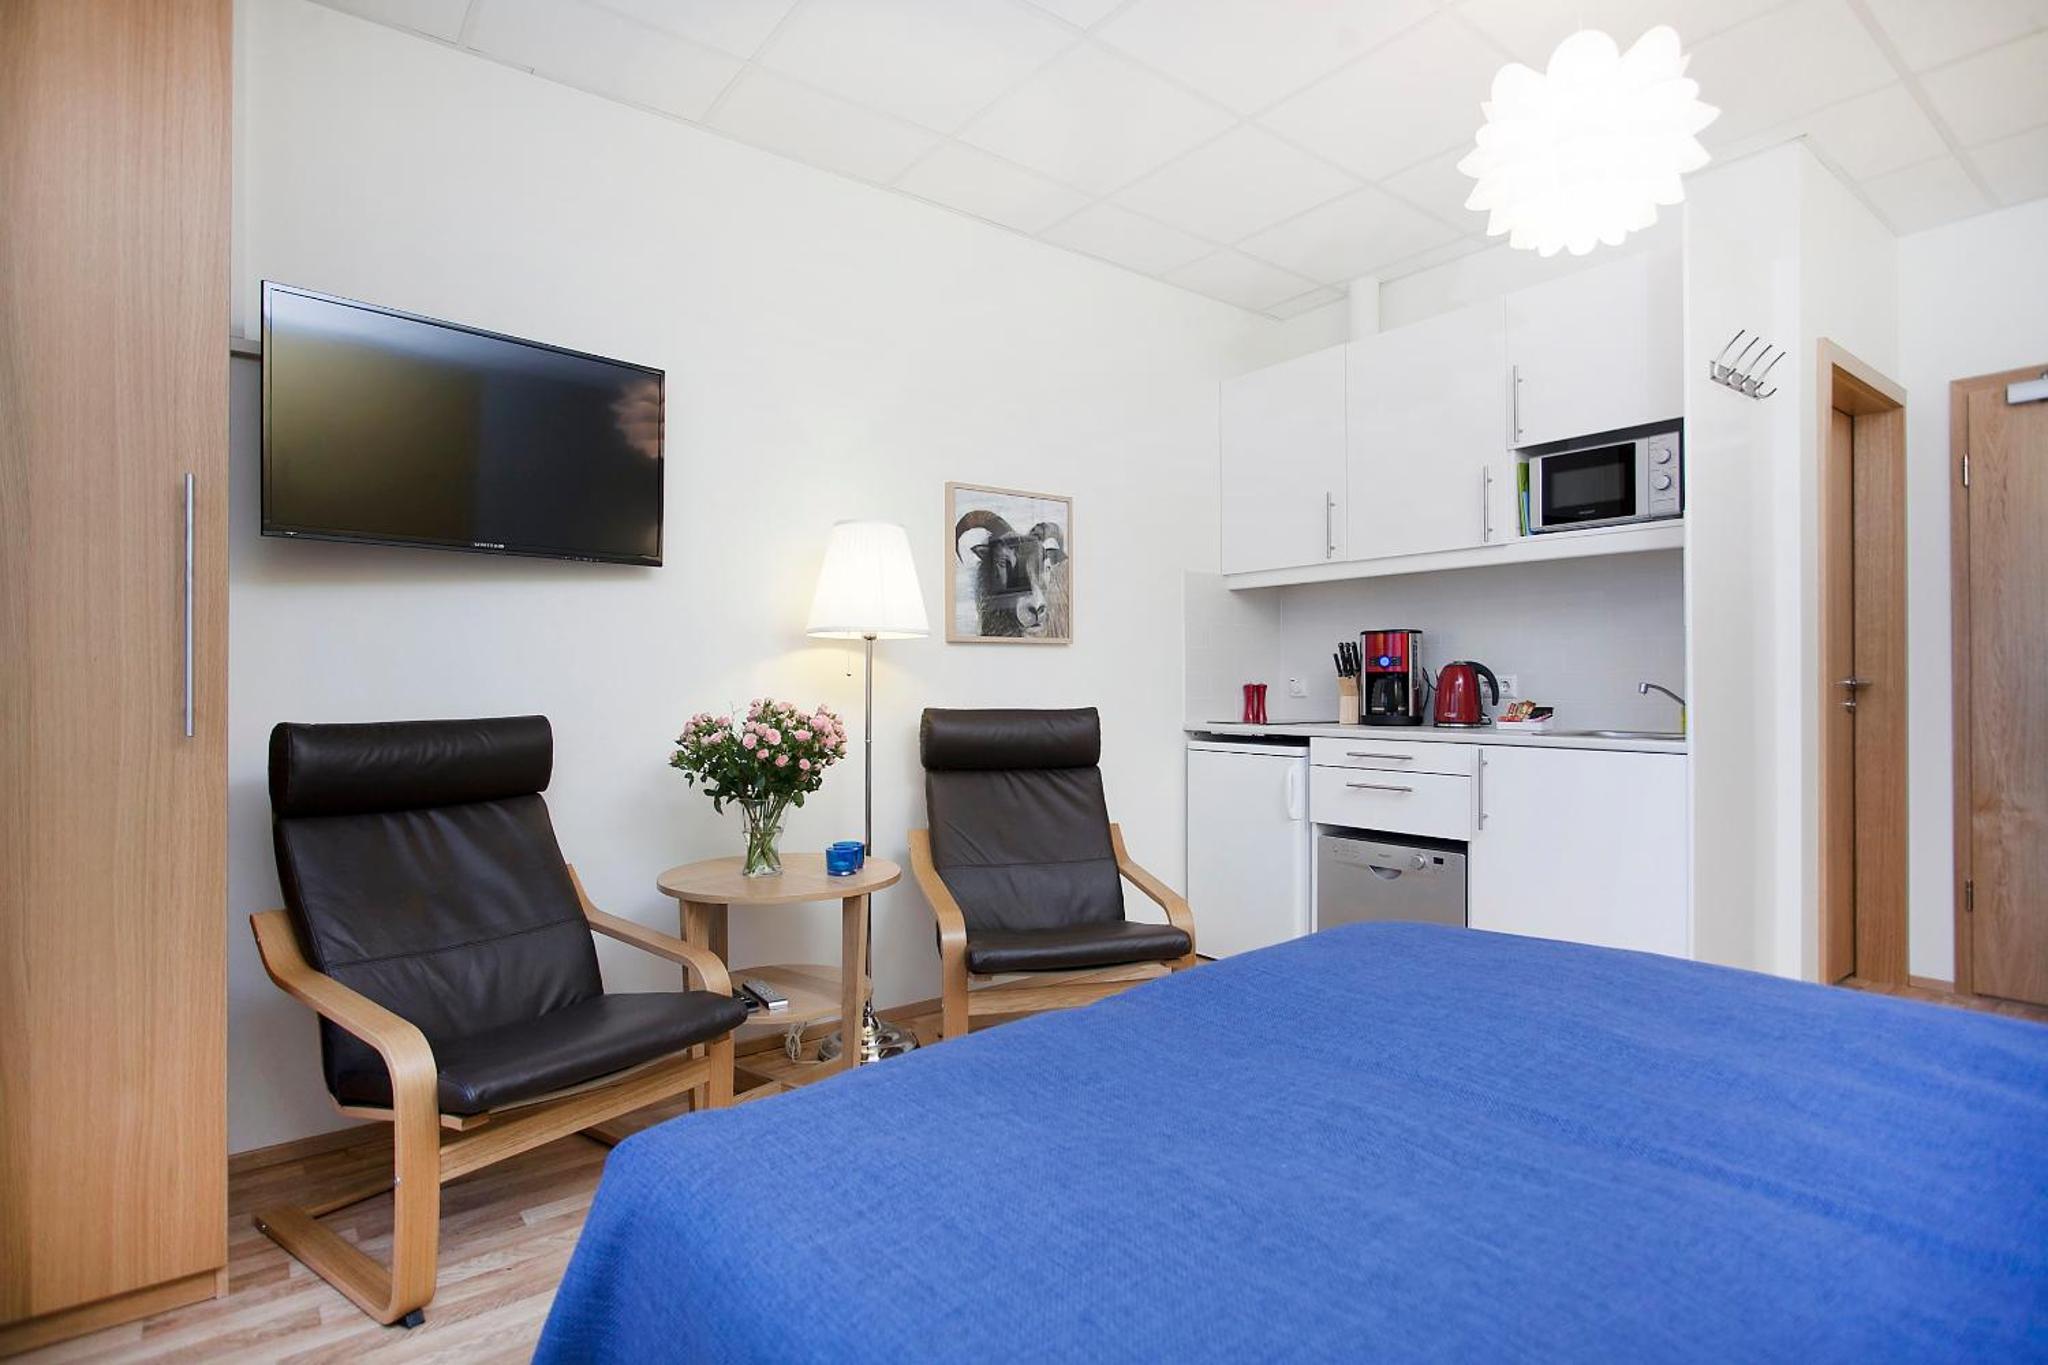 Modern Serviced Hotel Apartments - Northern Comfort Apartments